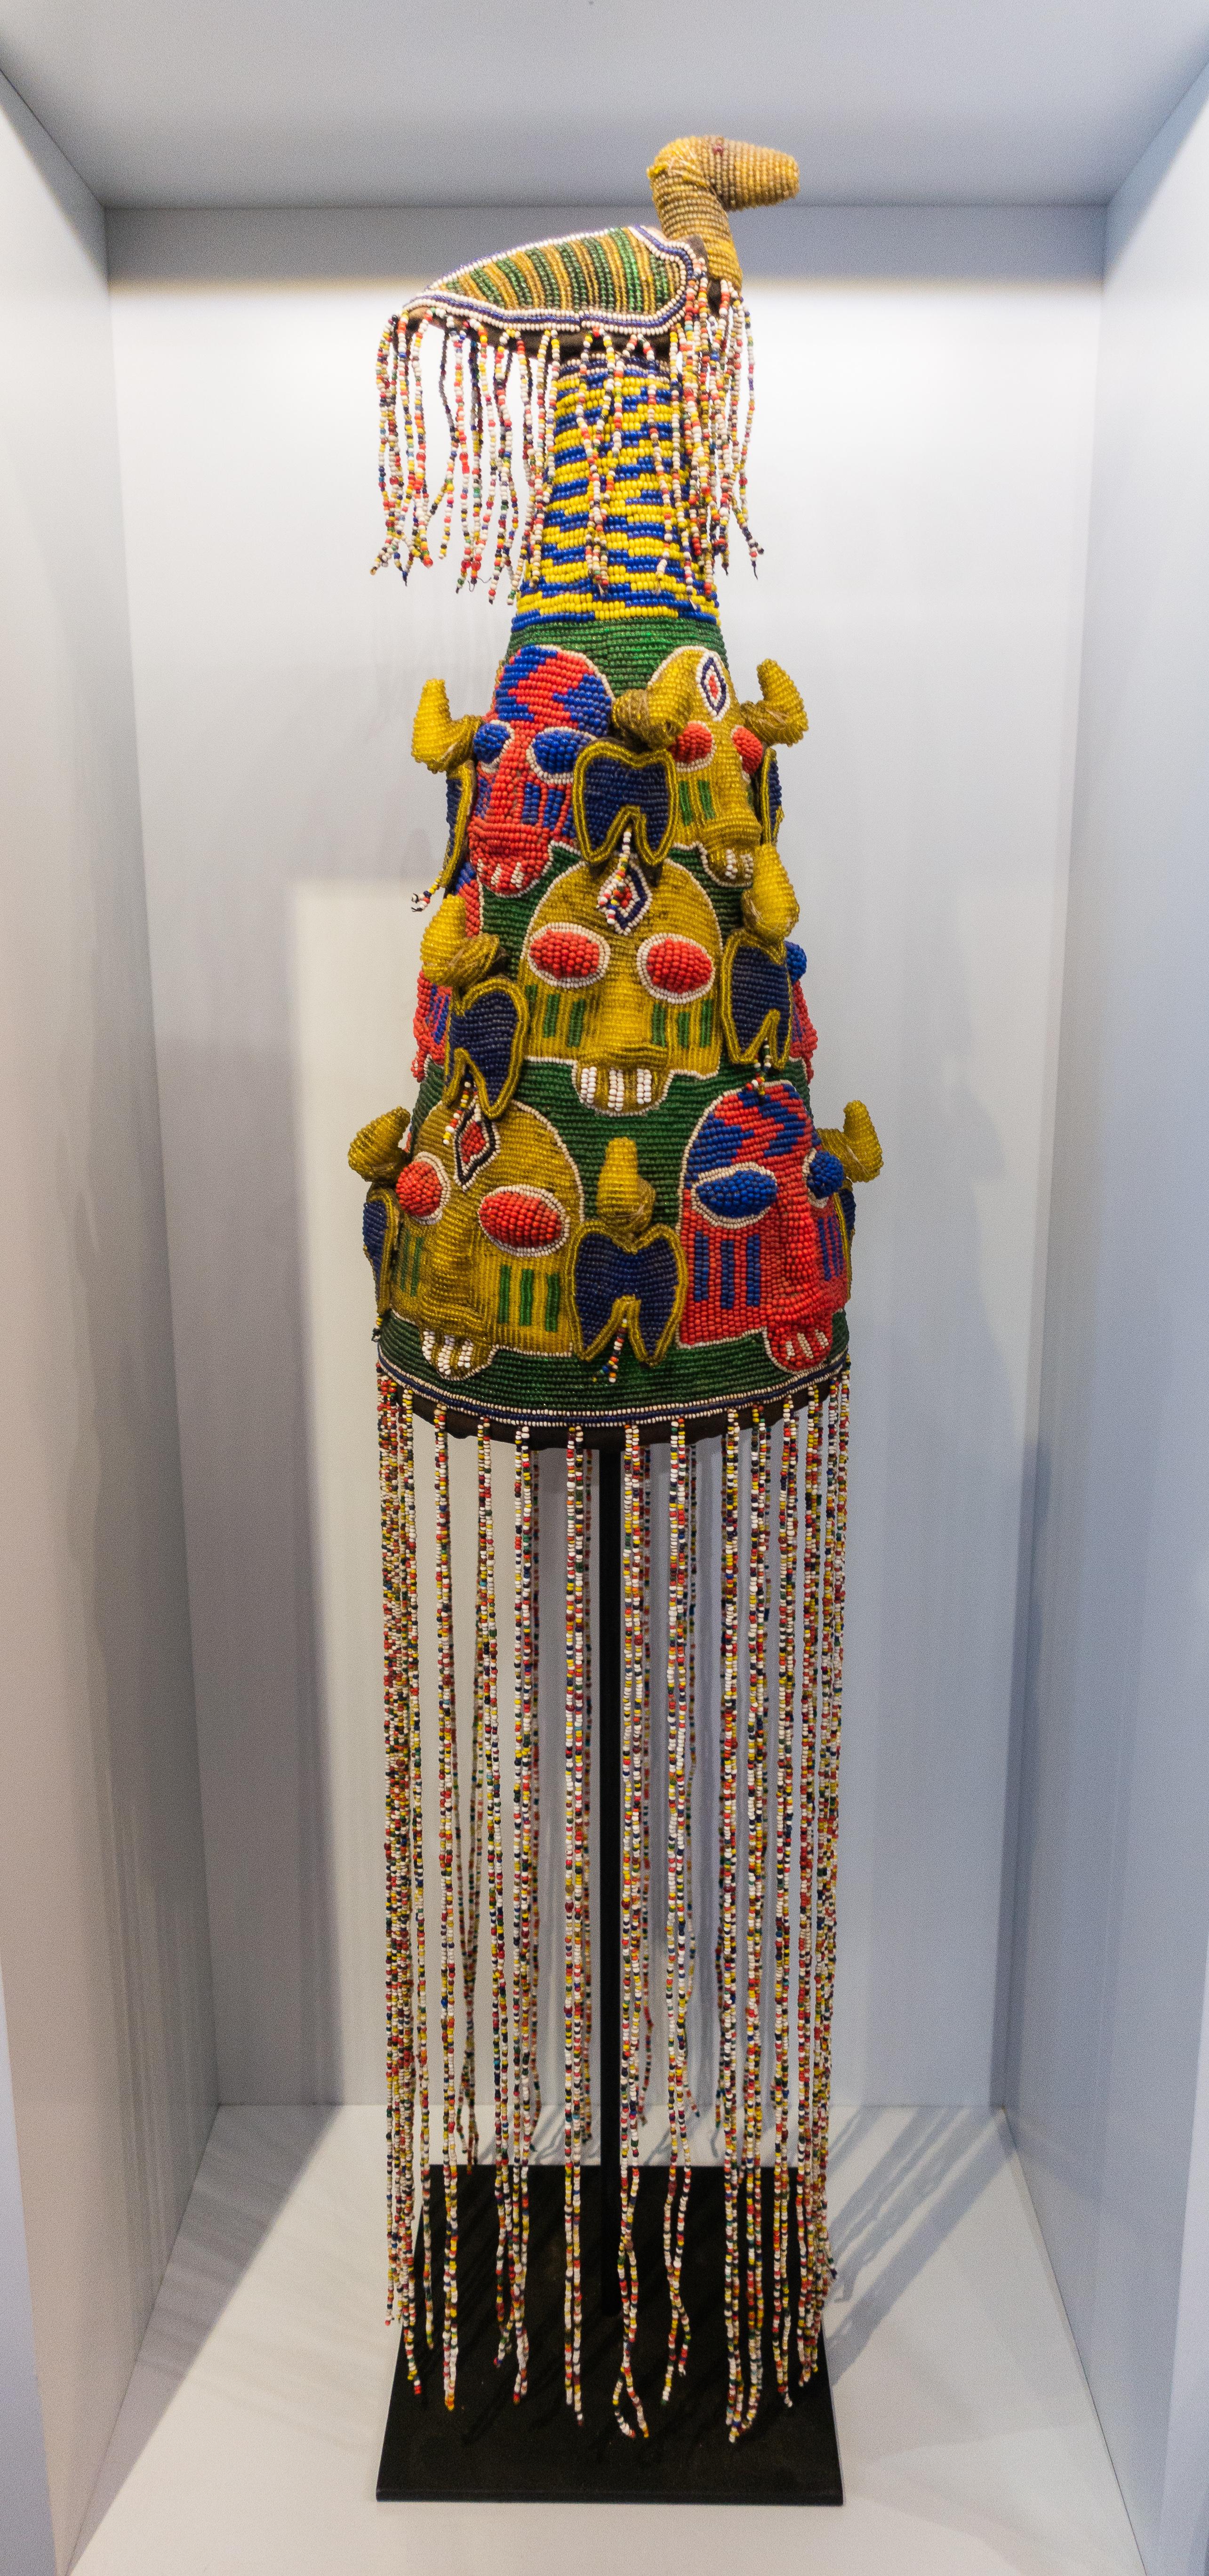 Multi-color beaded ceremonial headdress from Nigeria mounted on a custom metal stand, mid-20th century.